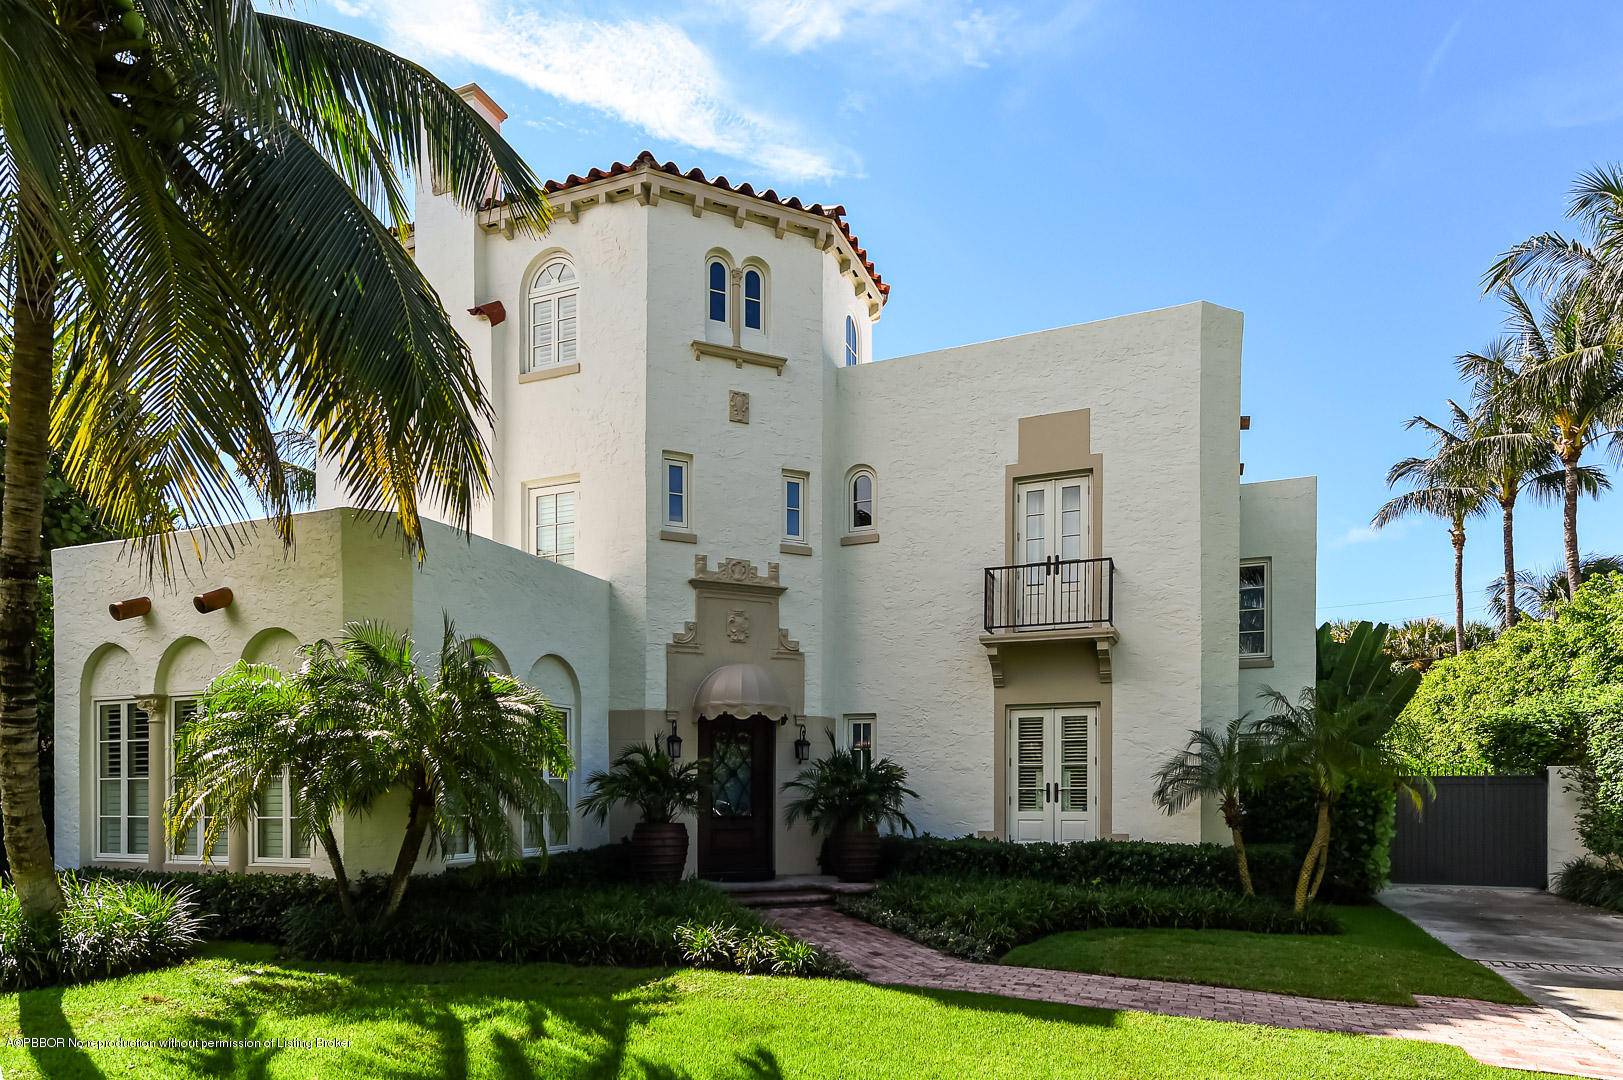 Three story Mediterranean Revival style residence located in town on a coveted ocean block.